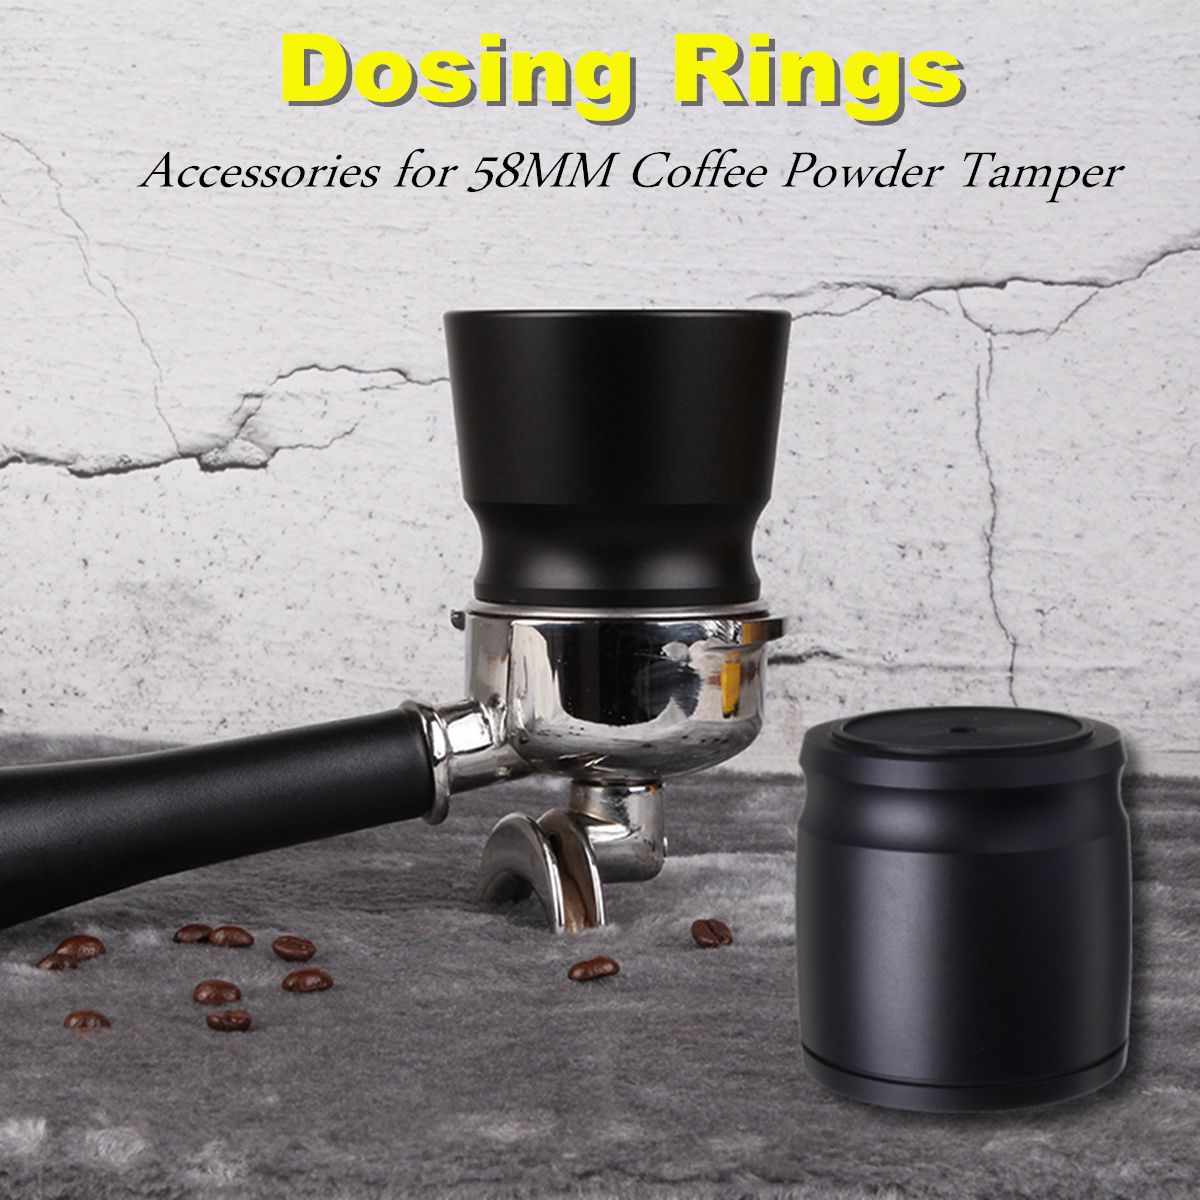 Aluminum-Dosing-Ring-for-Brewing-Bowl-Coffee-Powder-Accessories-for-58MM-Coffee-Tamper-Cup-1468128